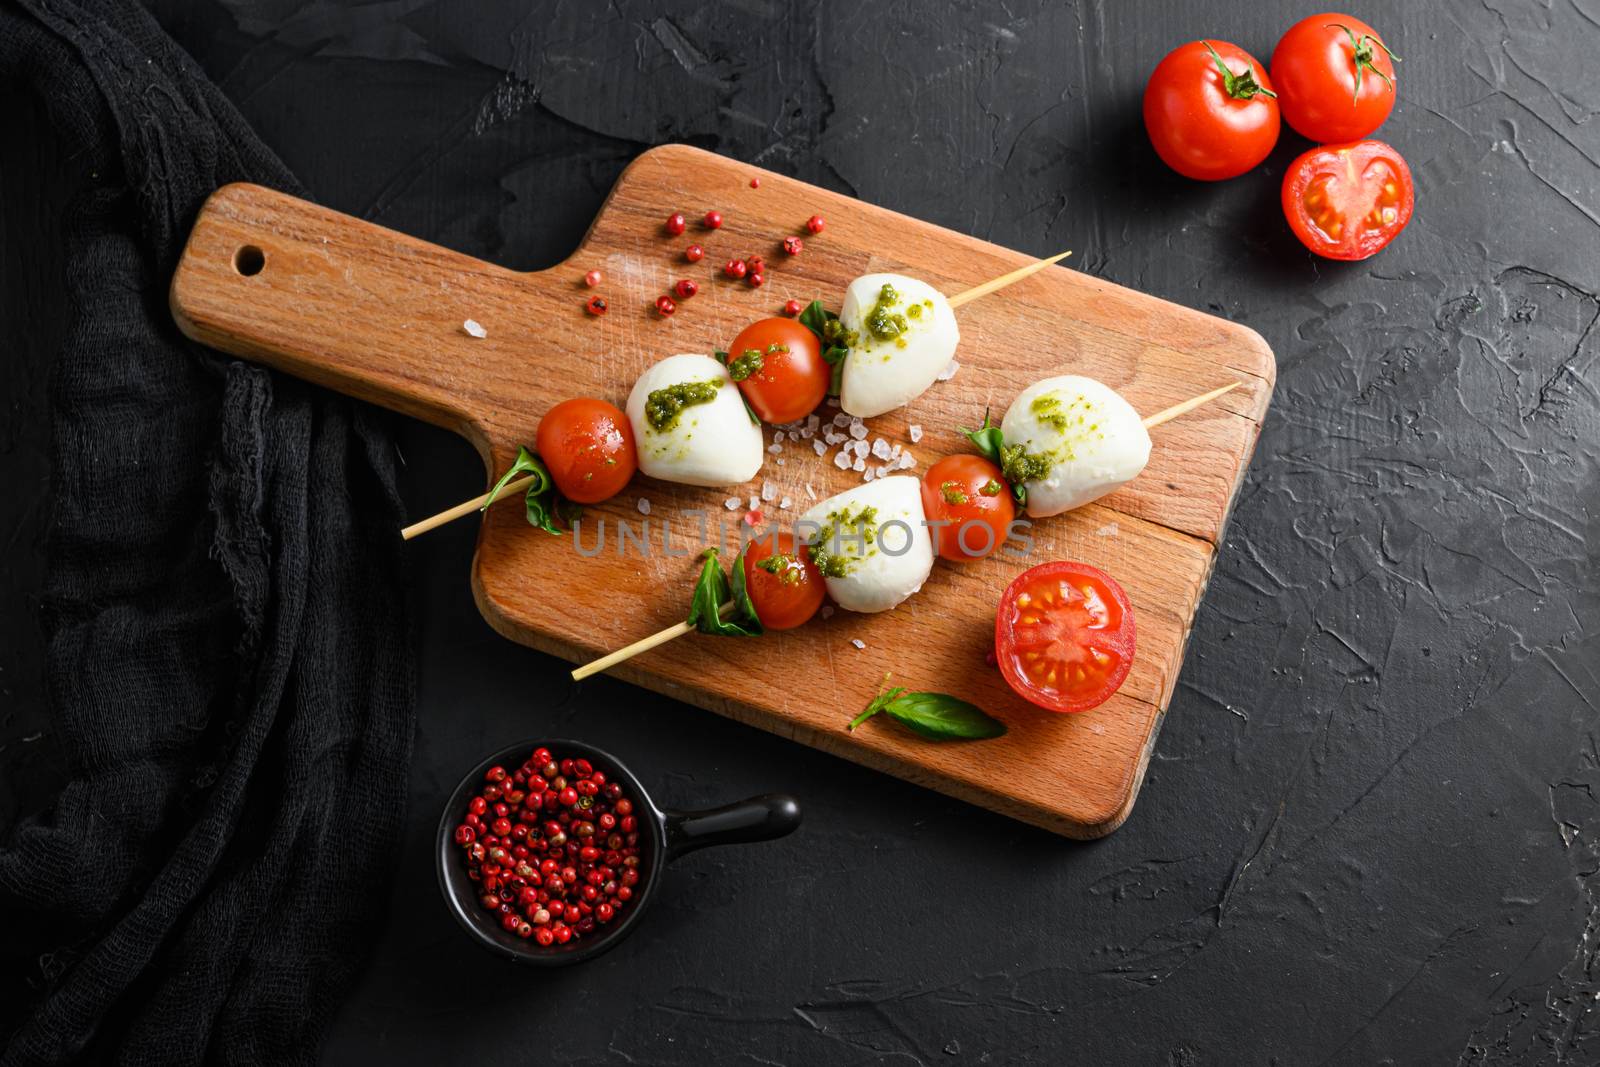 caprese salad skewer with tomato on sticks Italian traditional caprese salad ingredients. Mediterranean food. over black stone background overhead space for text by Ilianesolenyi